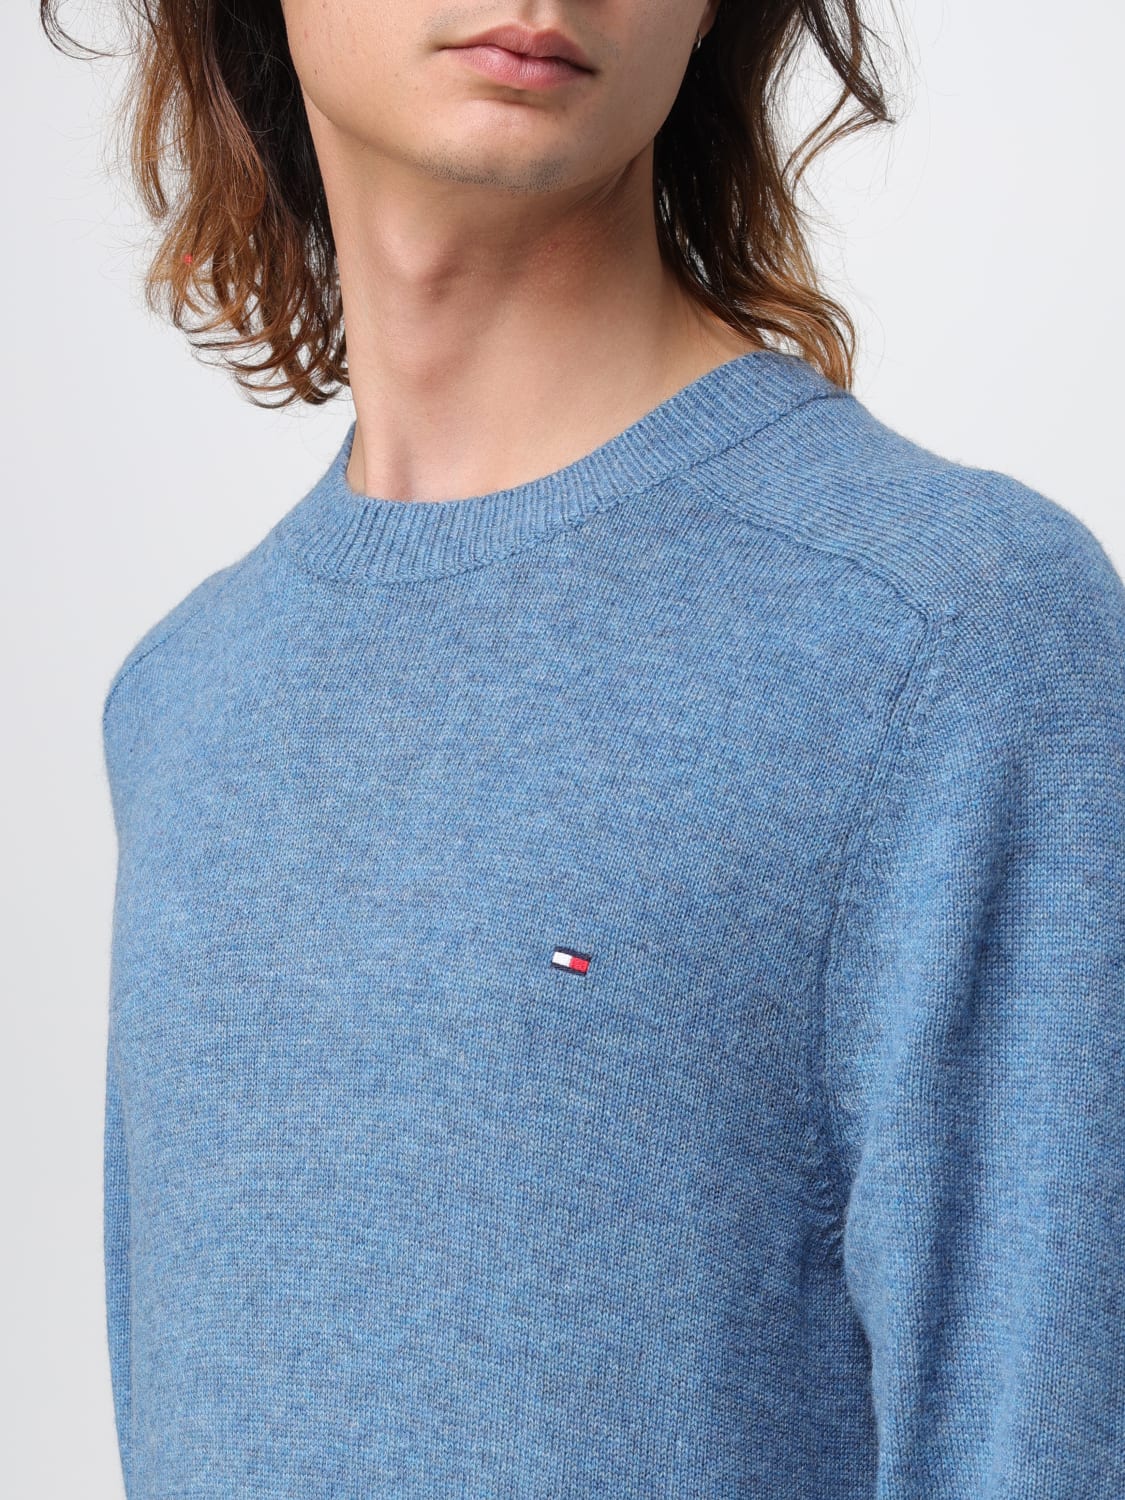 TOMMY HILFIGER: for man - Blue | Tommy Hilfiger sweater online at GIGLIO.COM